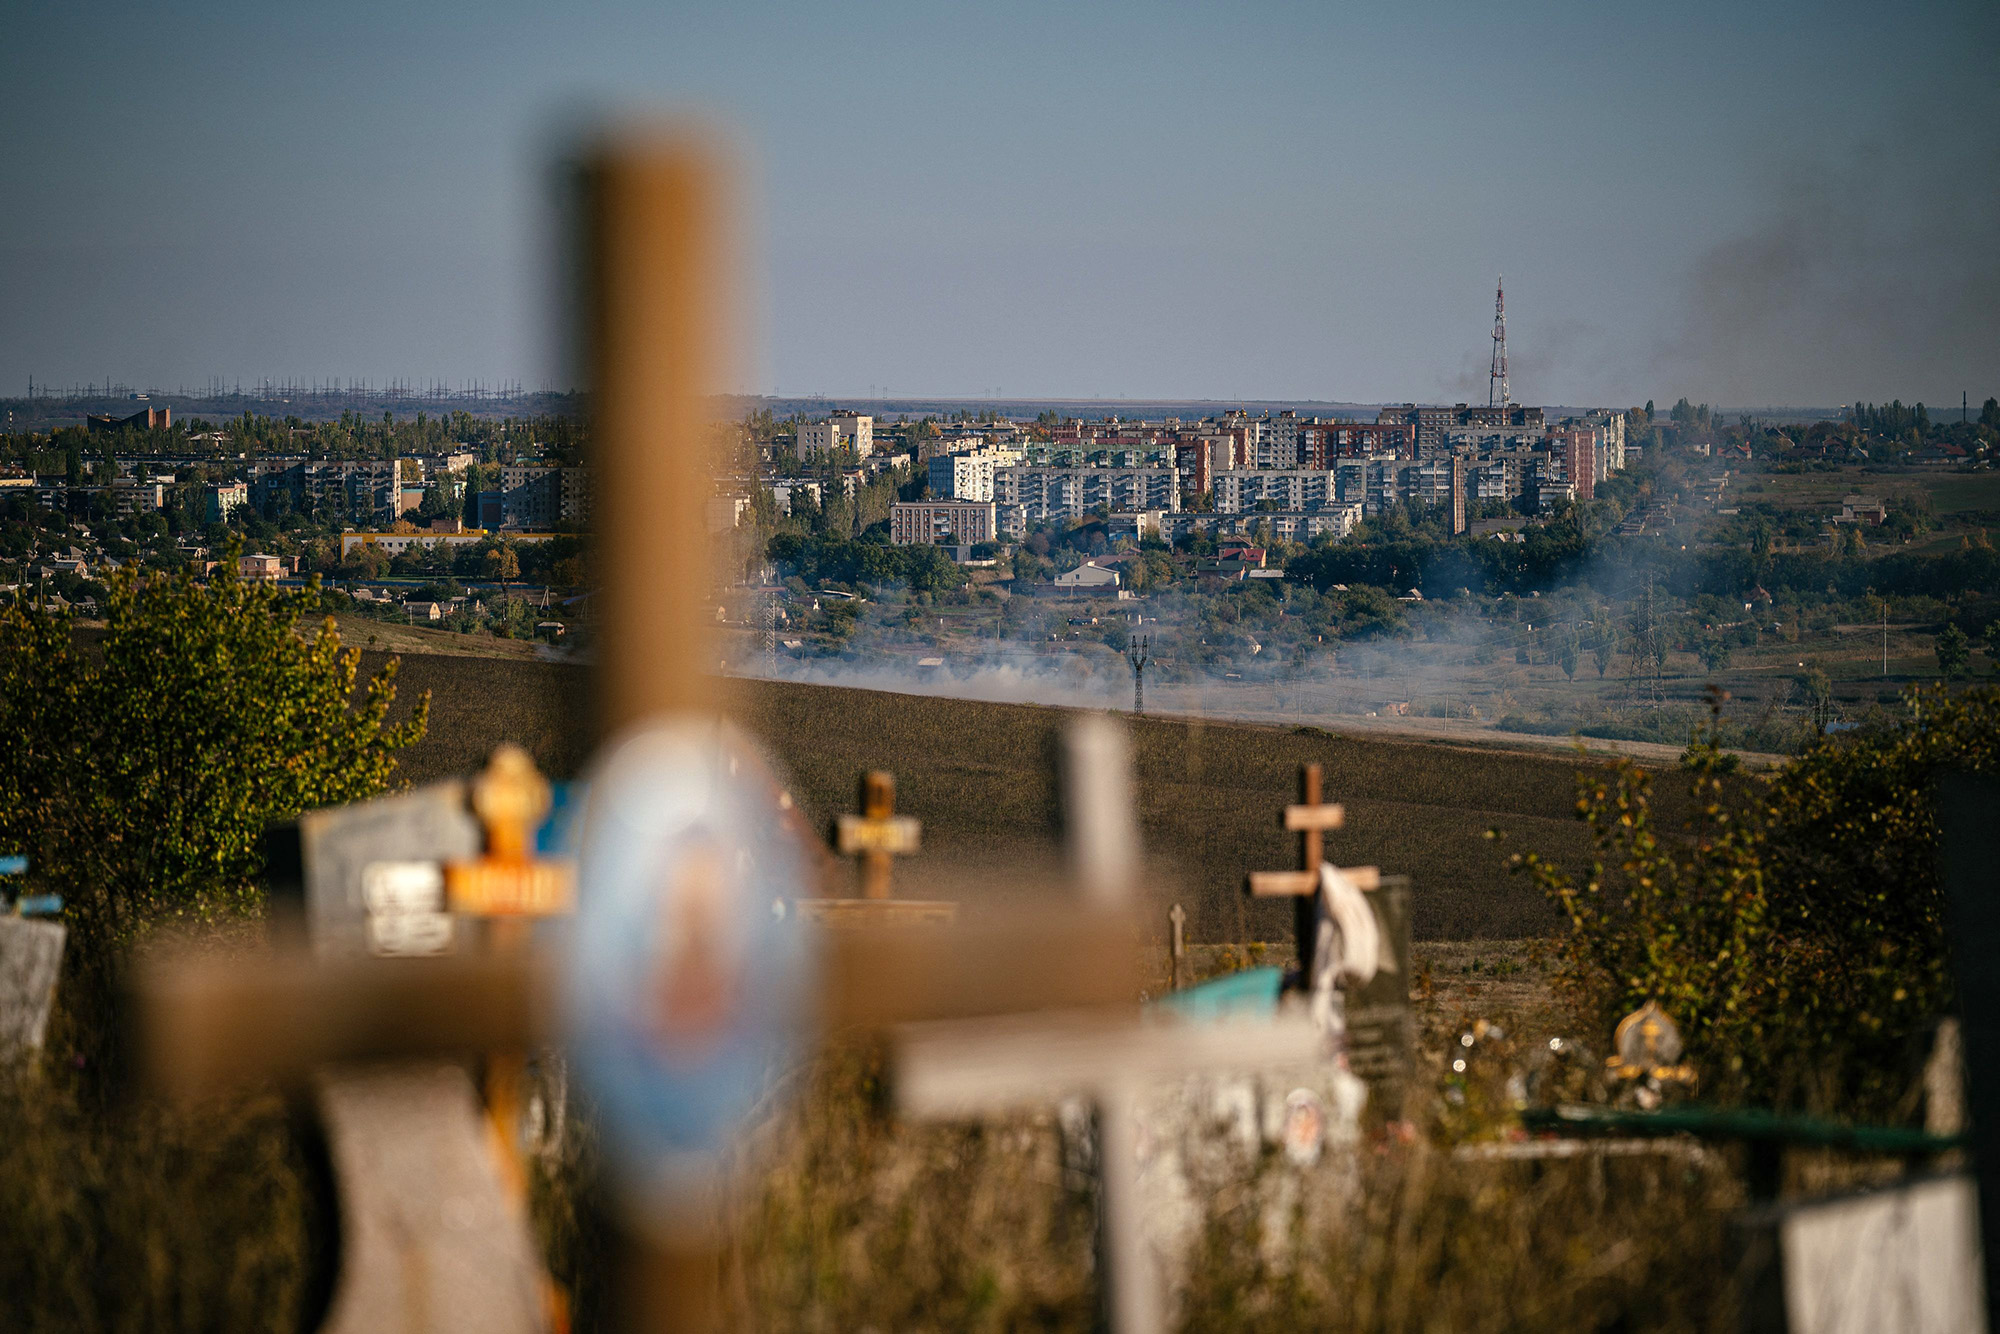 A view across the city of Bakhmut, Ukraine, on October 15.